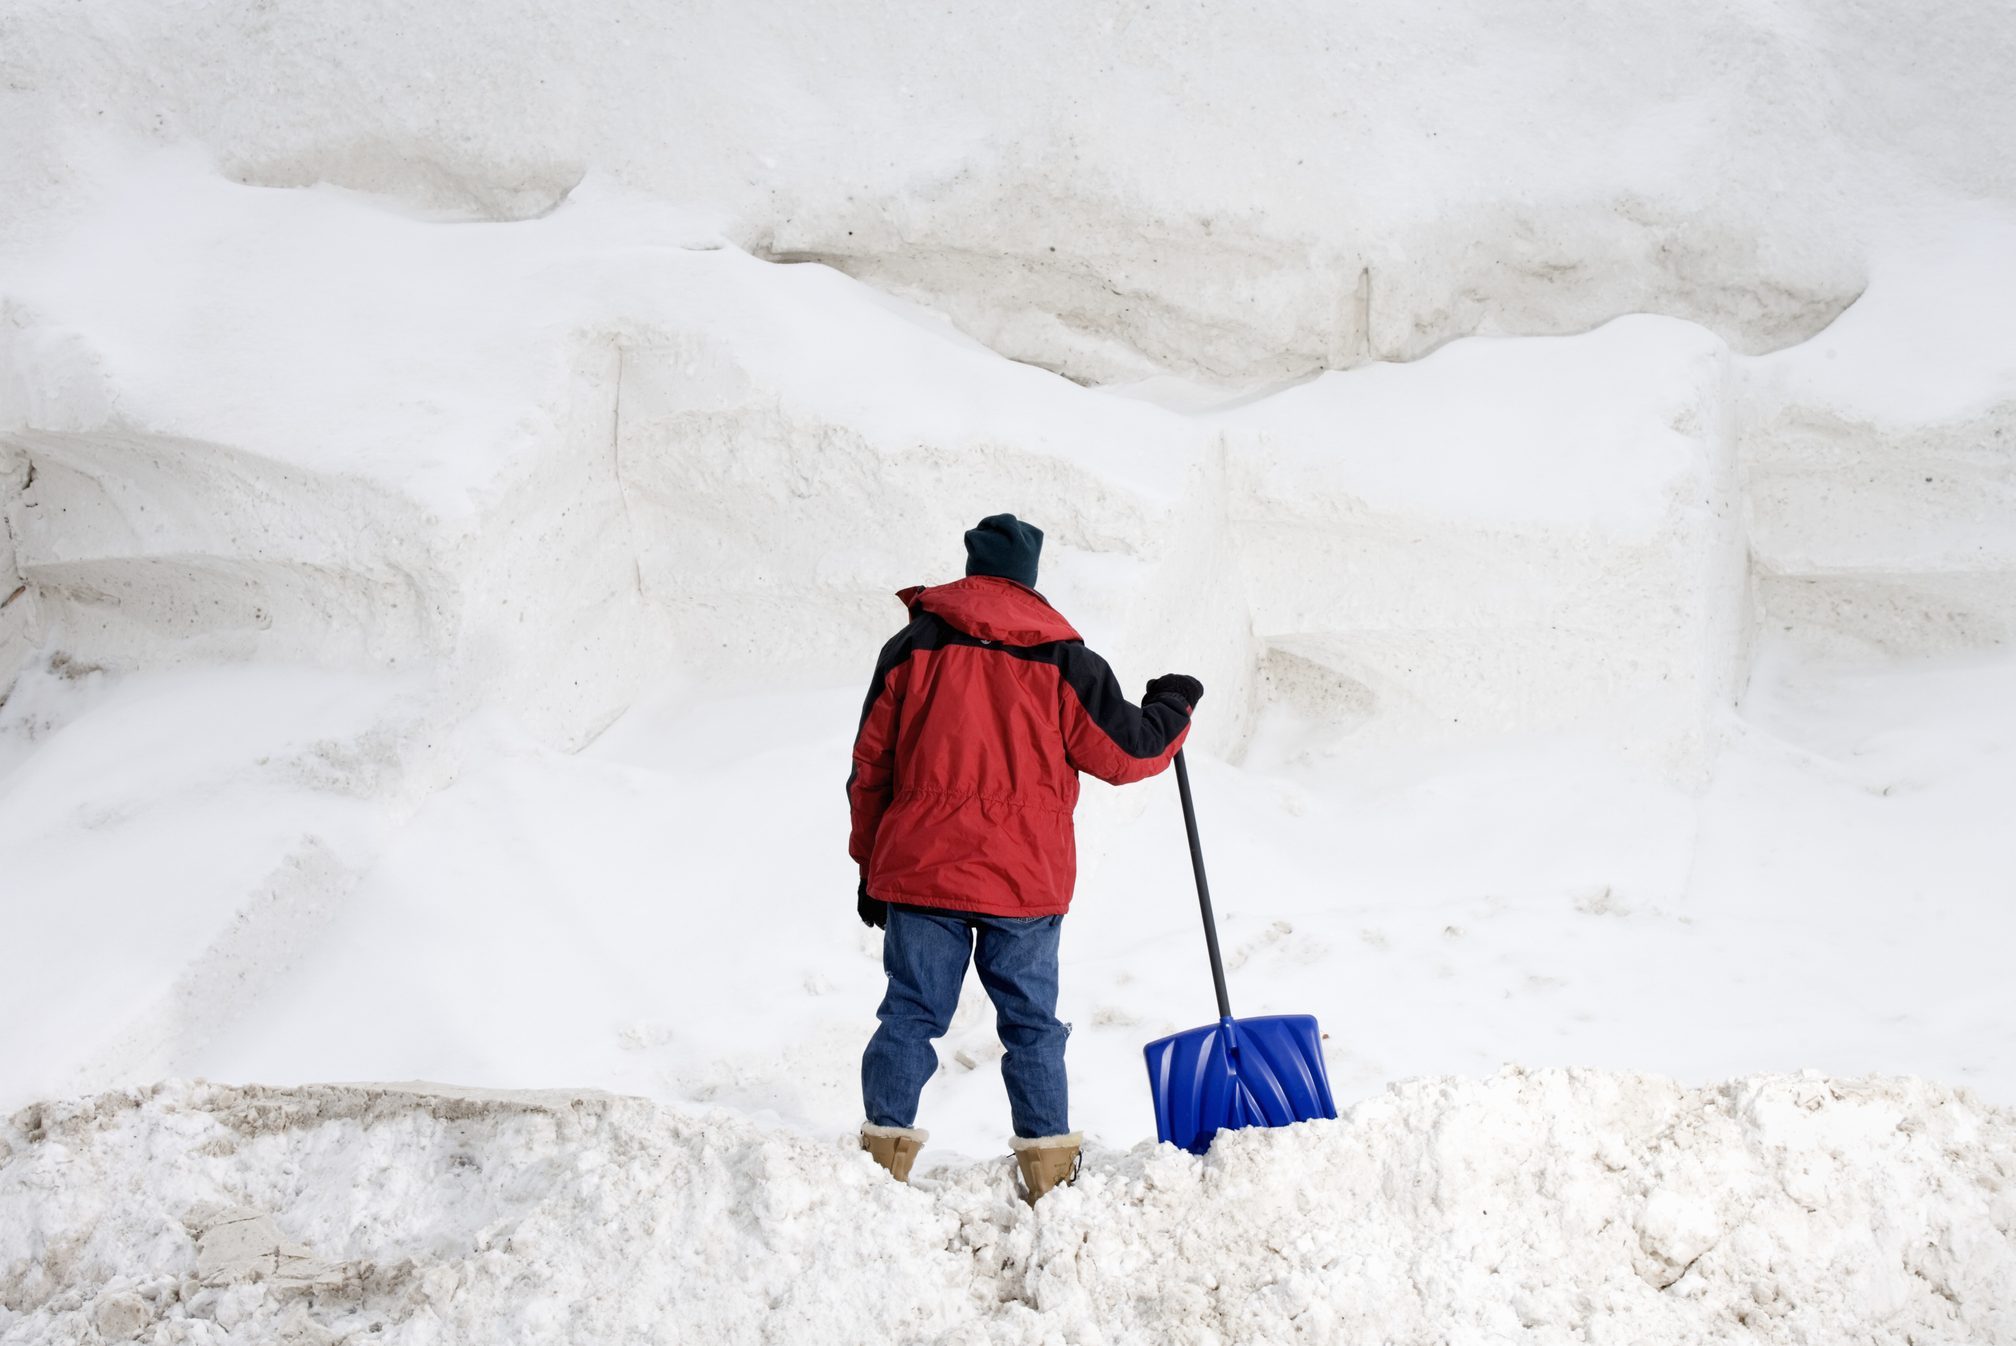 10 Tips to Safely Remove Snow and Ice